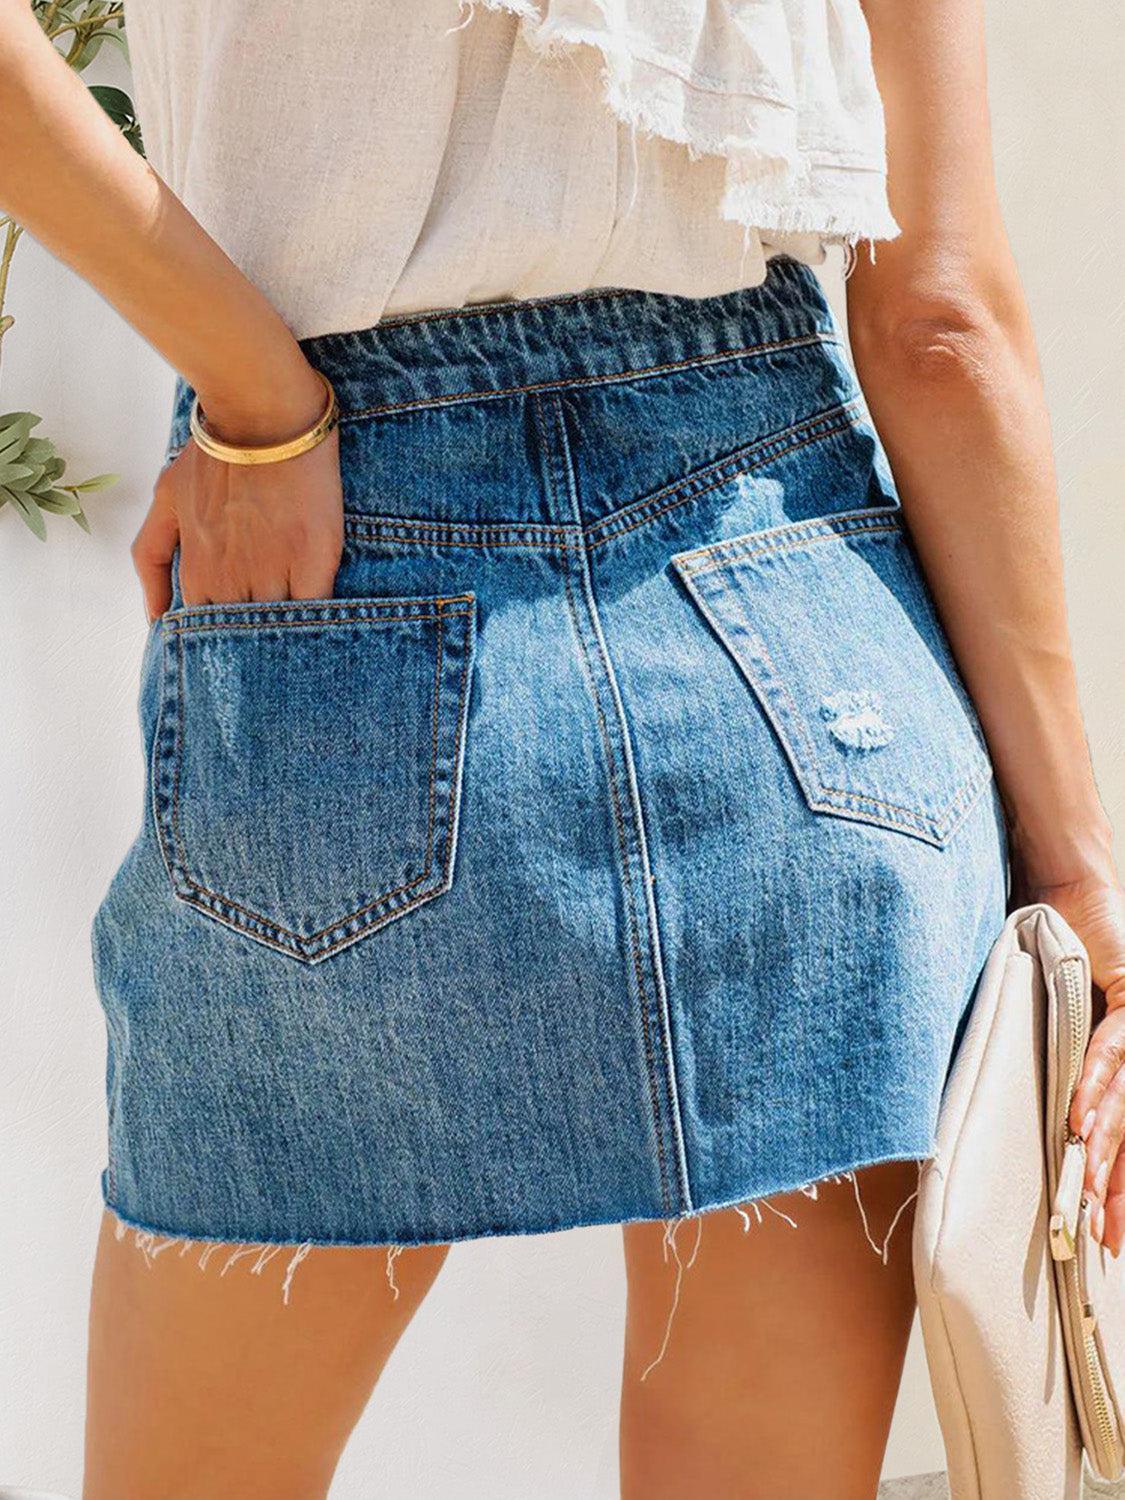 a woman wearing a denim skirt and a white top